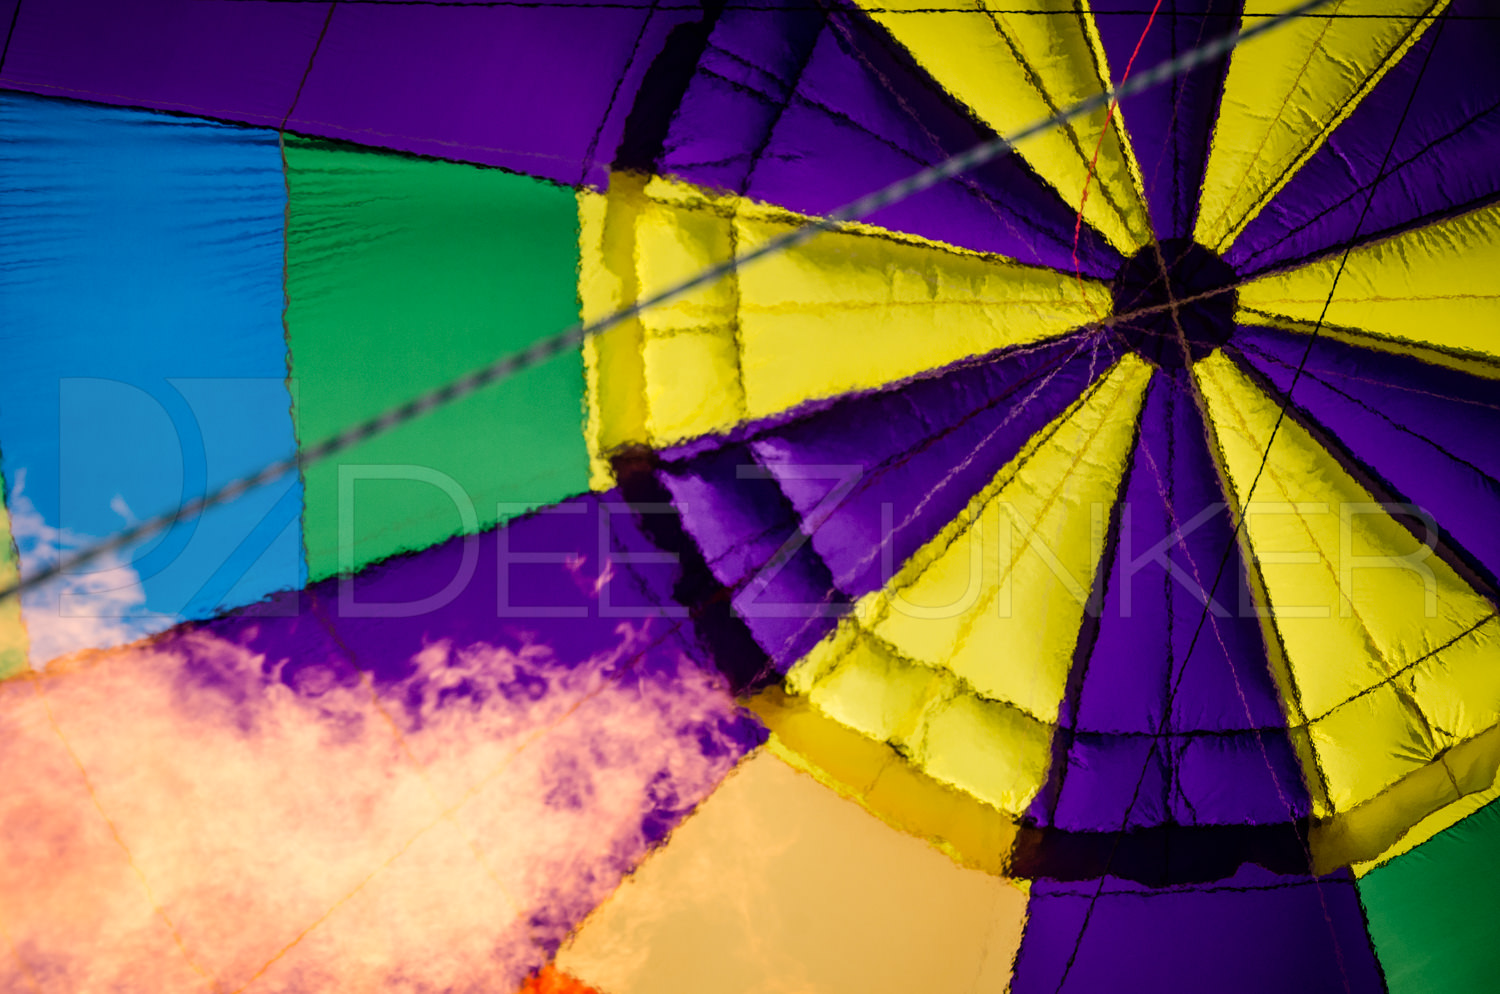 Going Hot at the Albuquerque Balloon Fiesta with Houston Commercial Architectural Photographer Dee Zunker